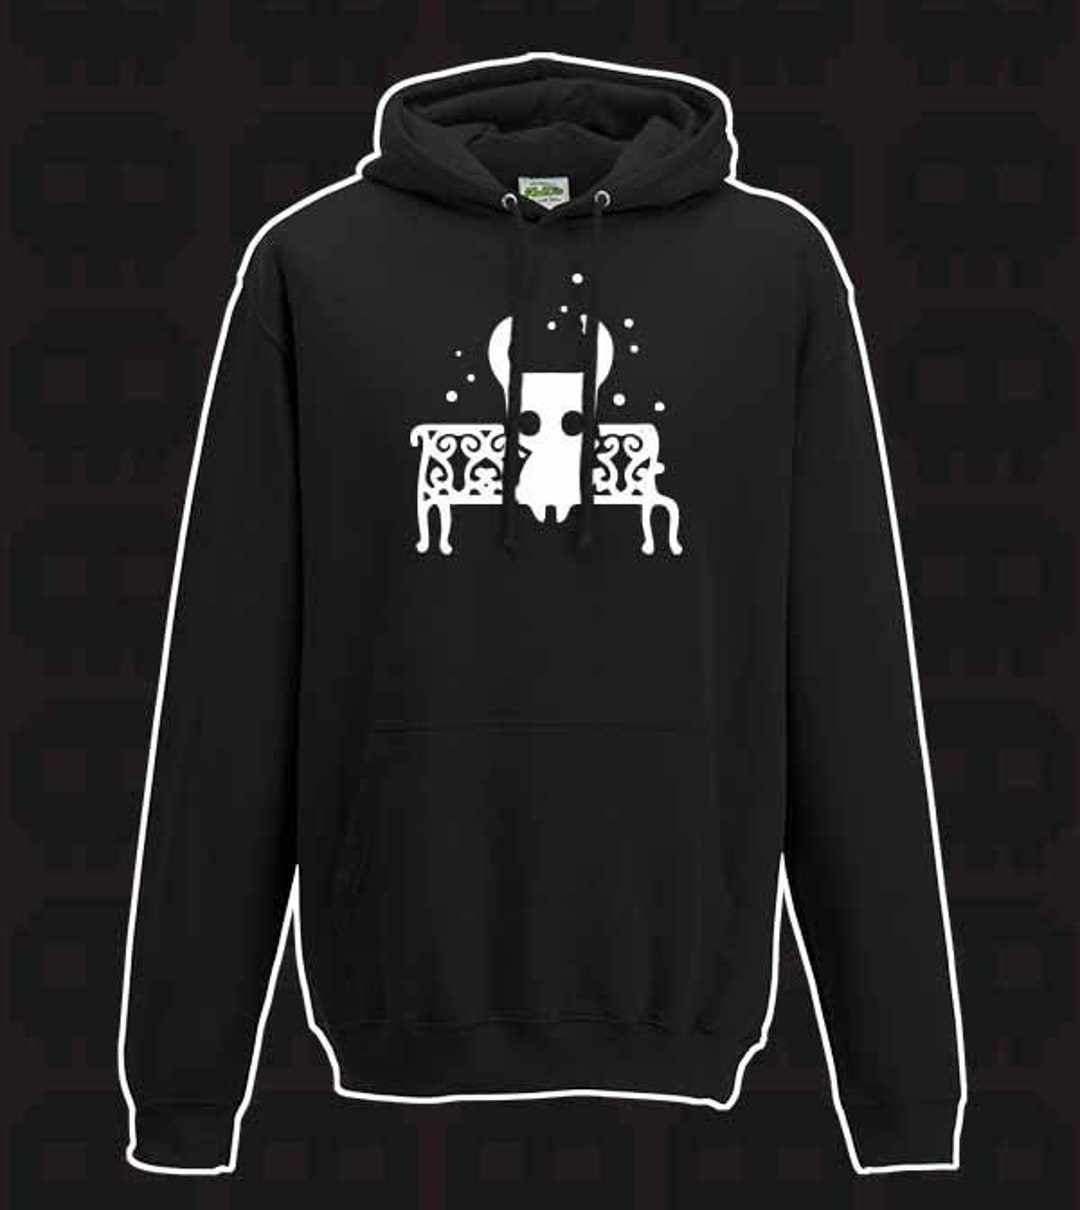 Hollow Knight Rest/save Silhouette Hoodie/hooded Sweatshirt Sizes S-XXL -  Etsy